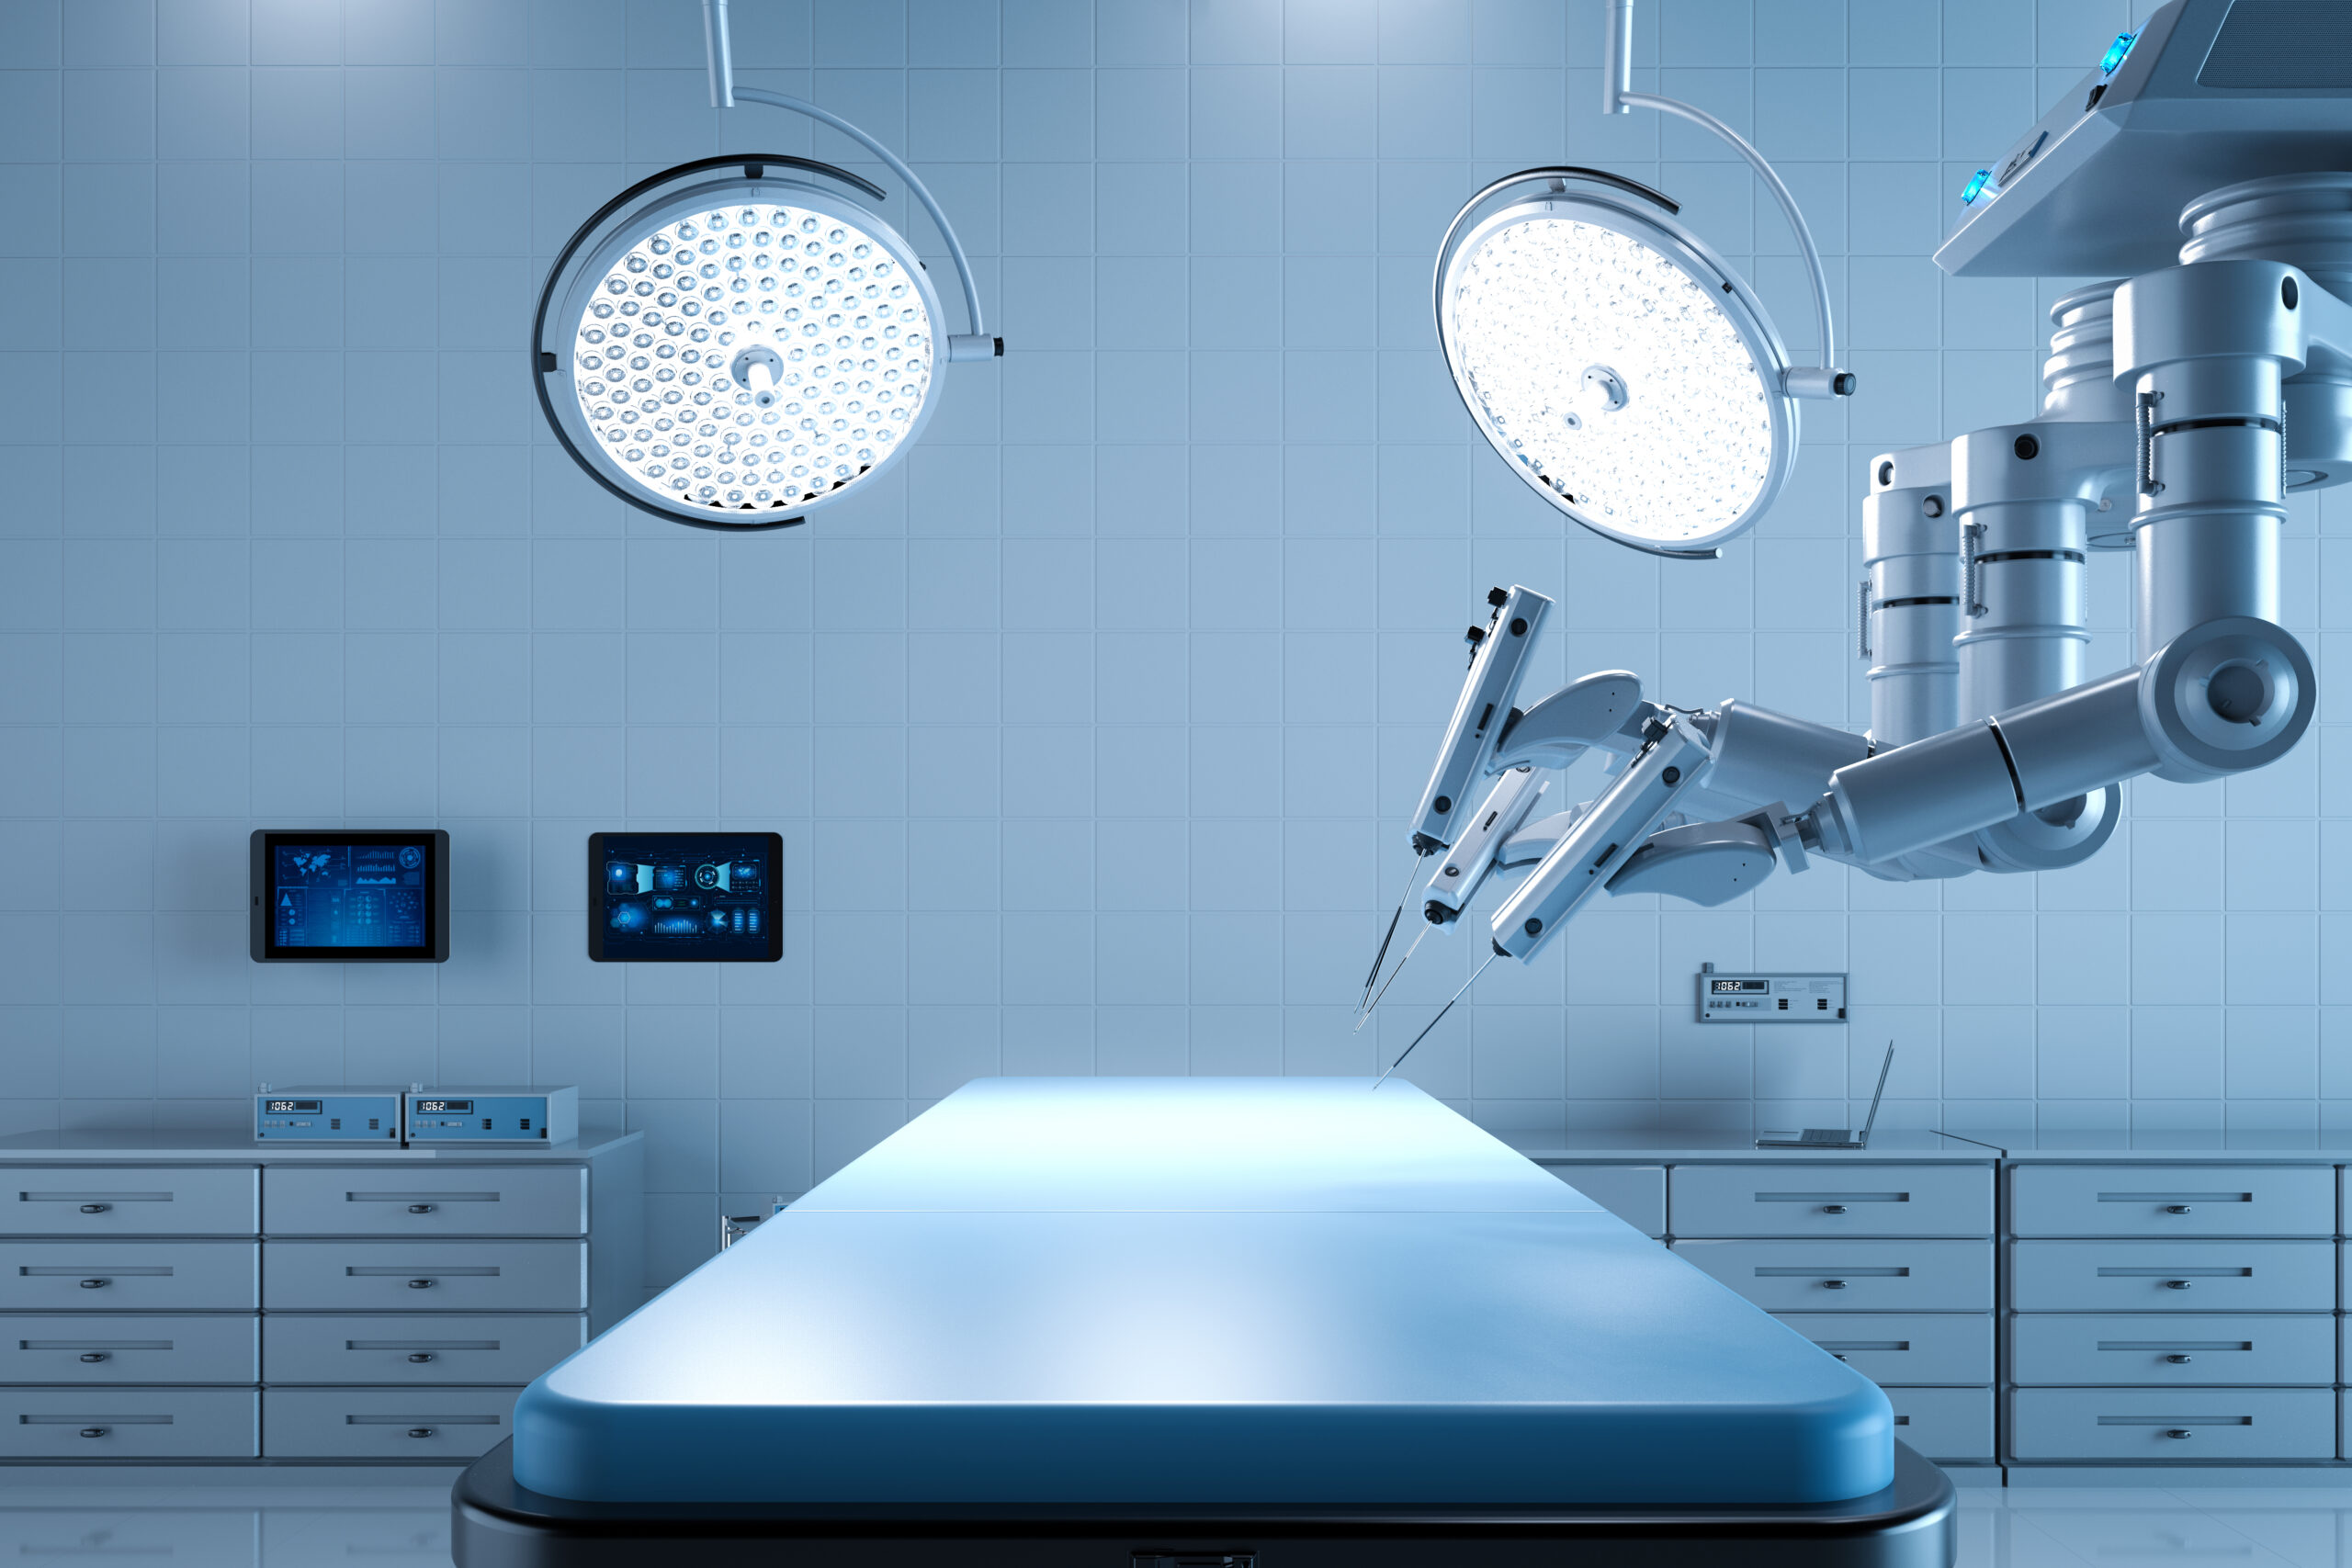 How government policies will drive South Korea’s robotic surgery market